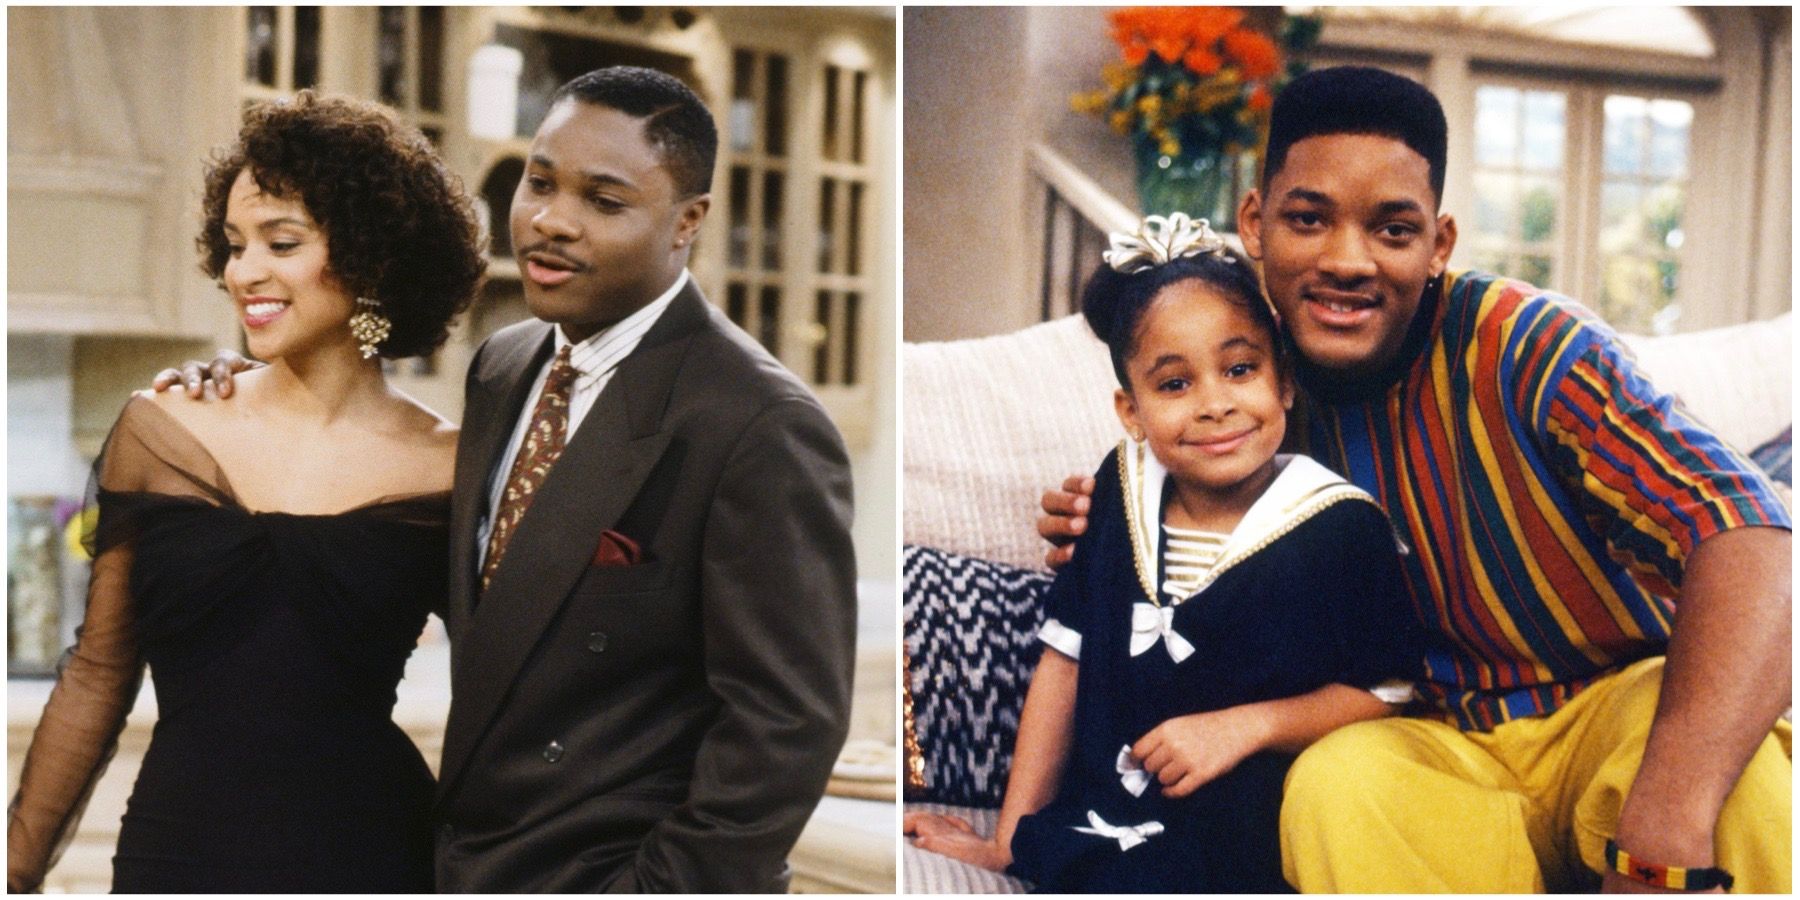 Malcolm Jamal Warner Karyn Parsons, Will Smith, and Raven Symone in The Fresh Prince of Bel Air